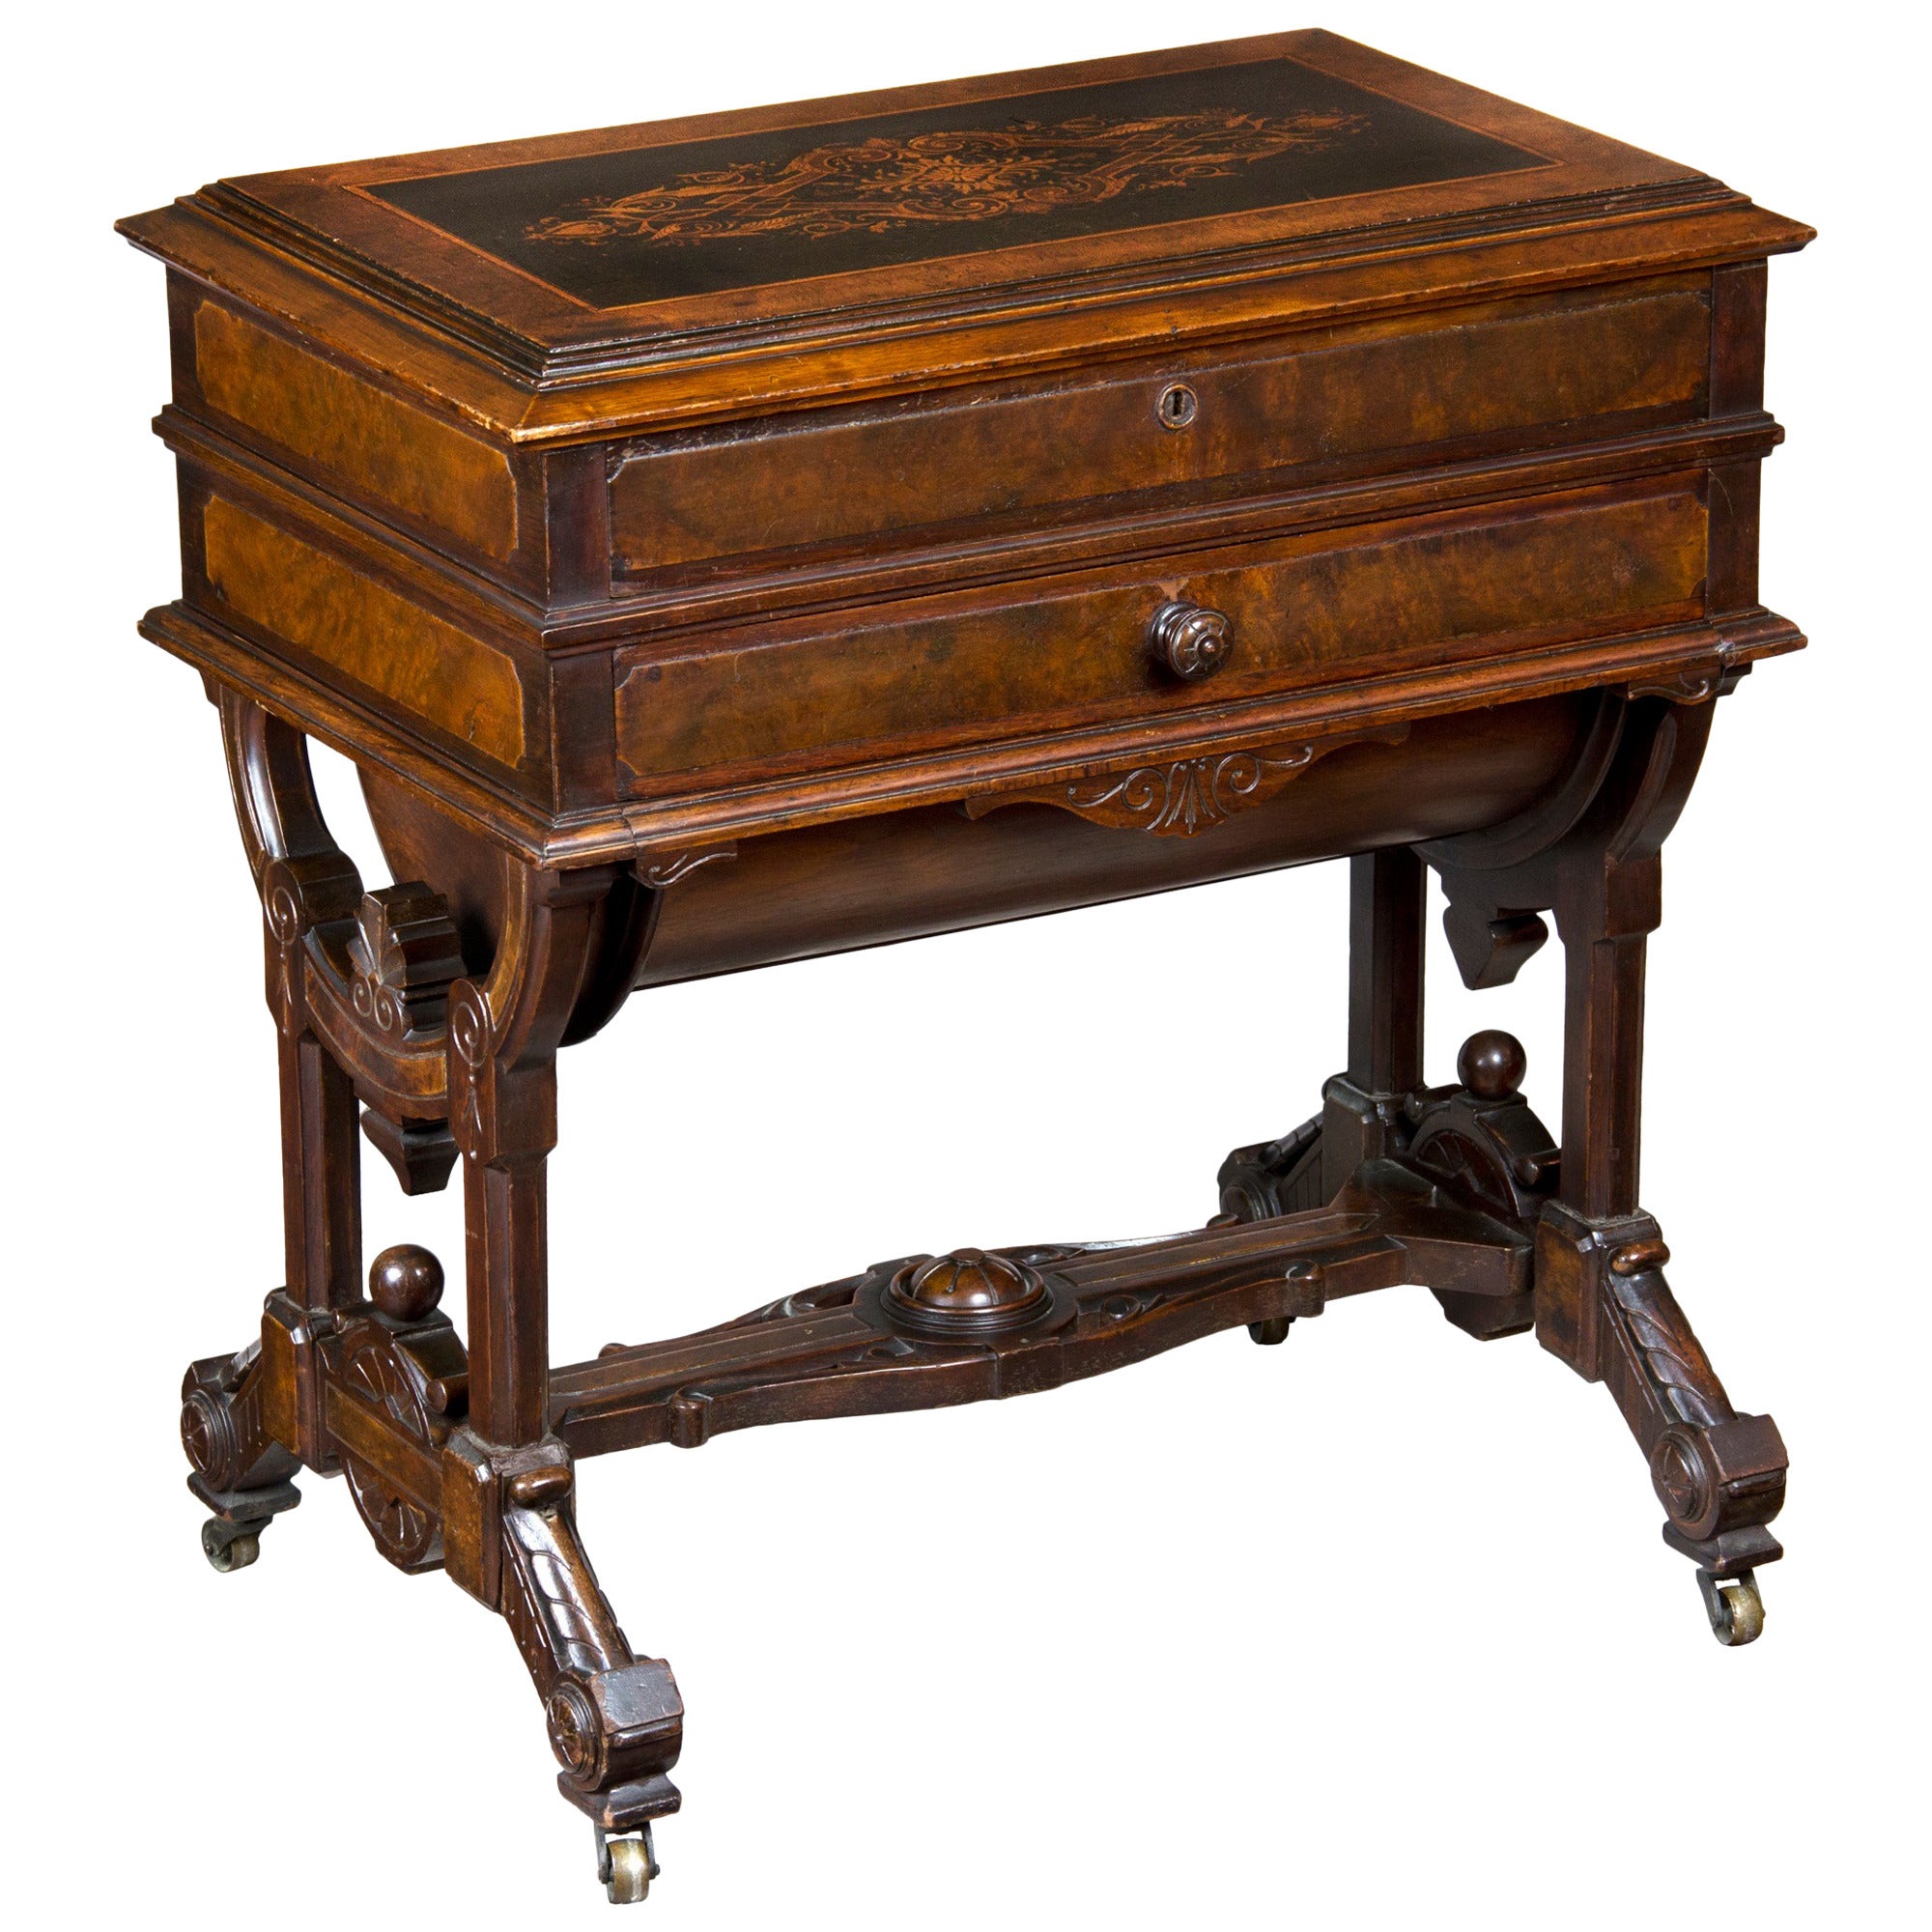 Renaissance Walnut Dressing Table Labeled George Hess, Patented, 1876, New York For Sale